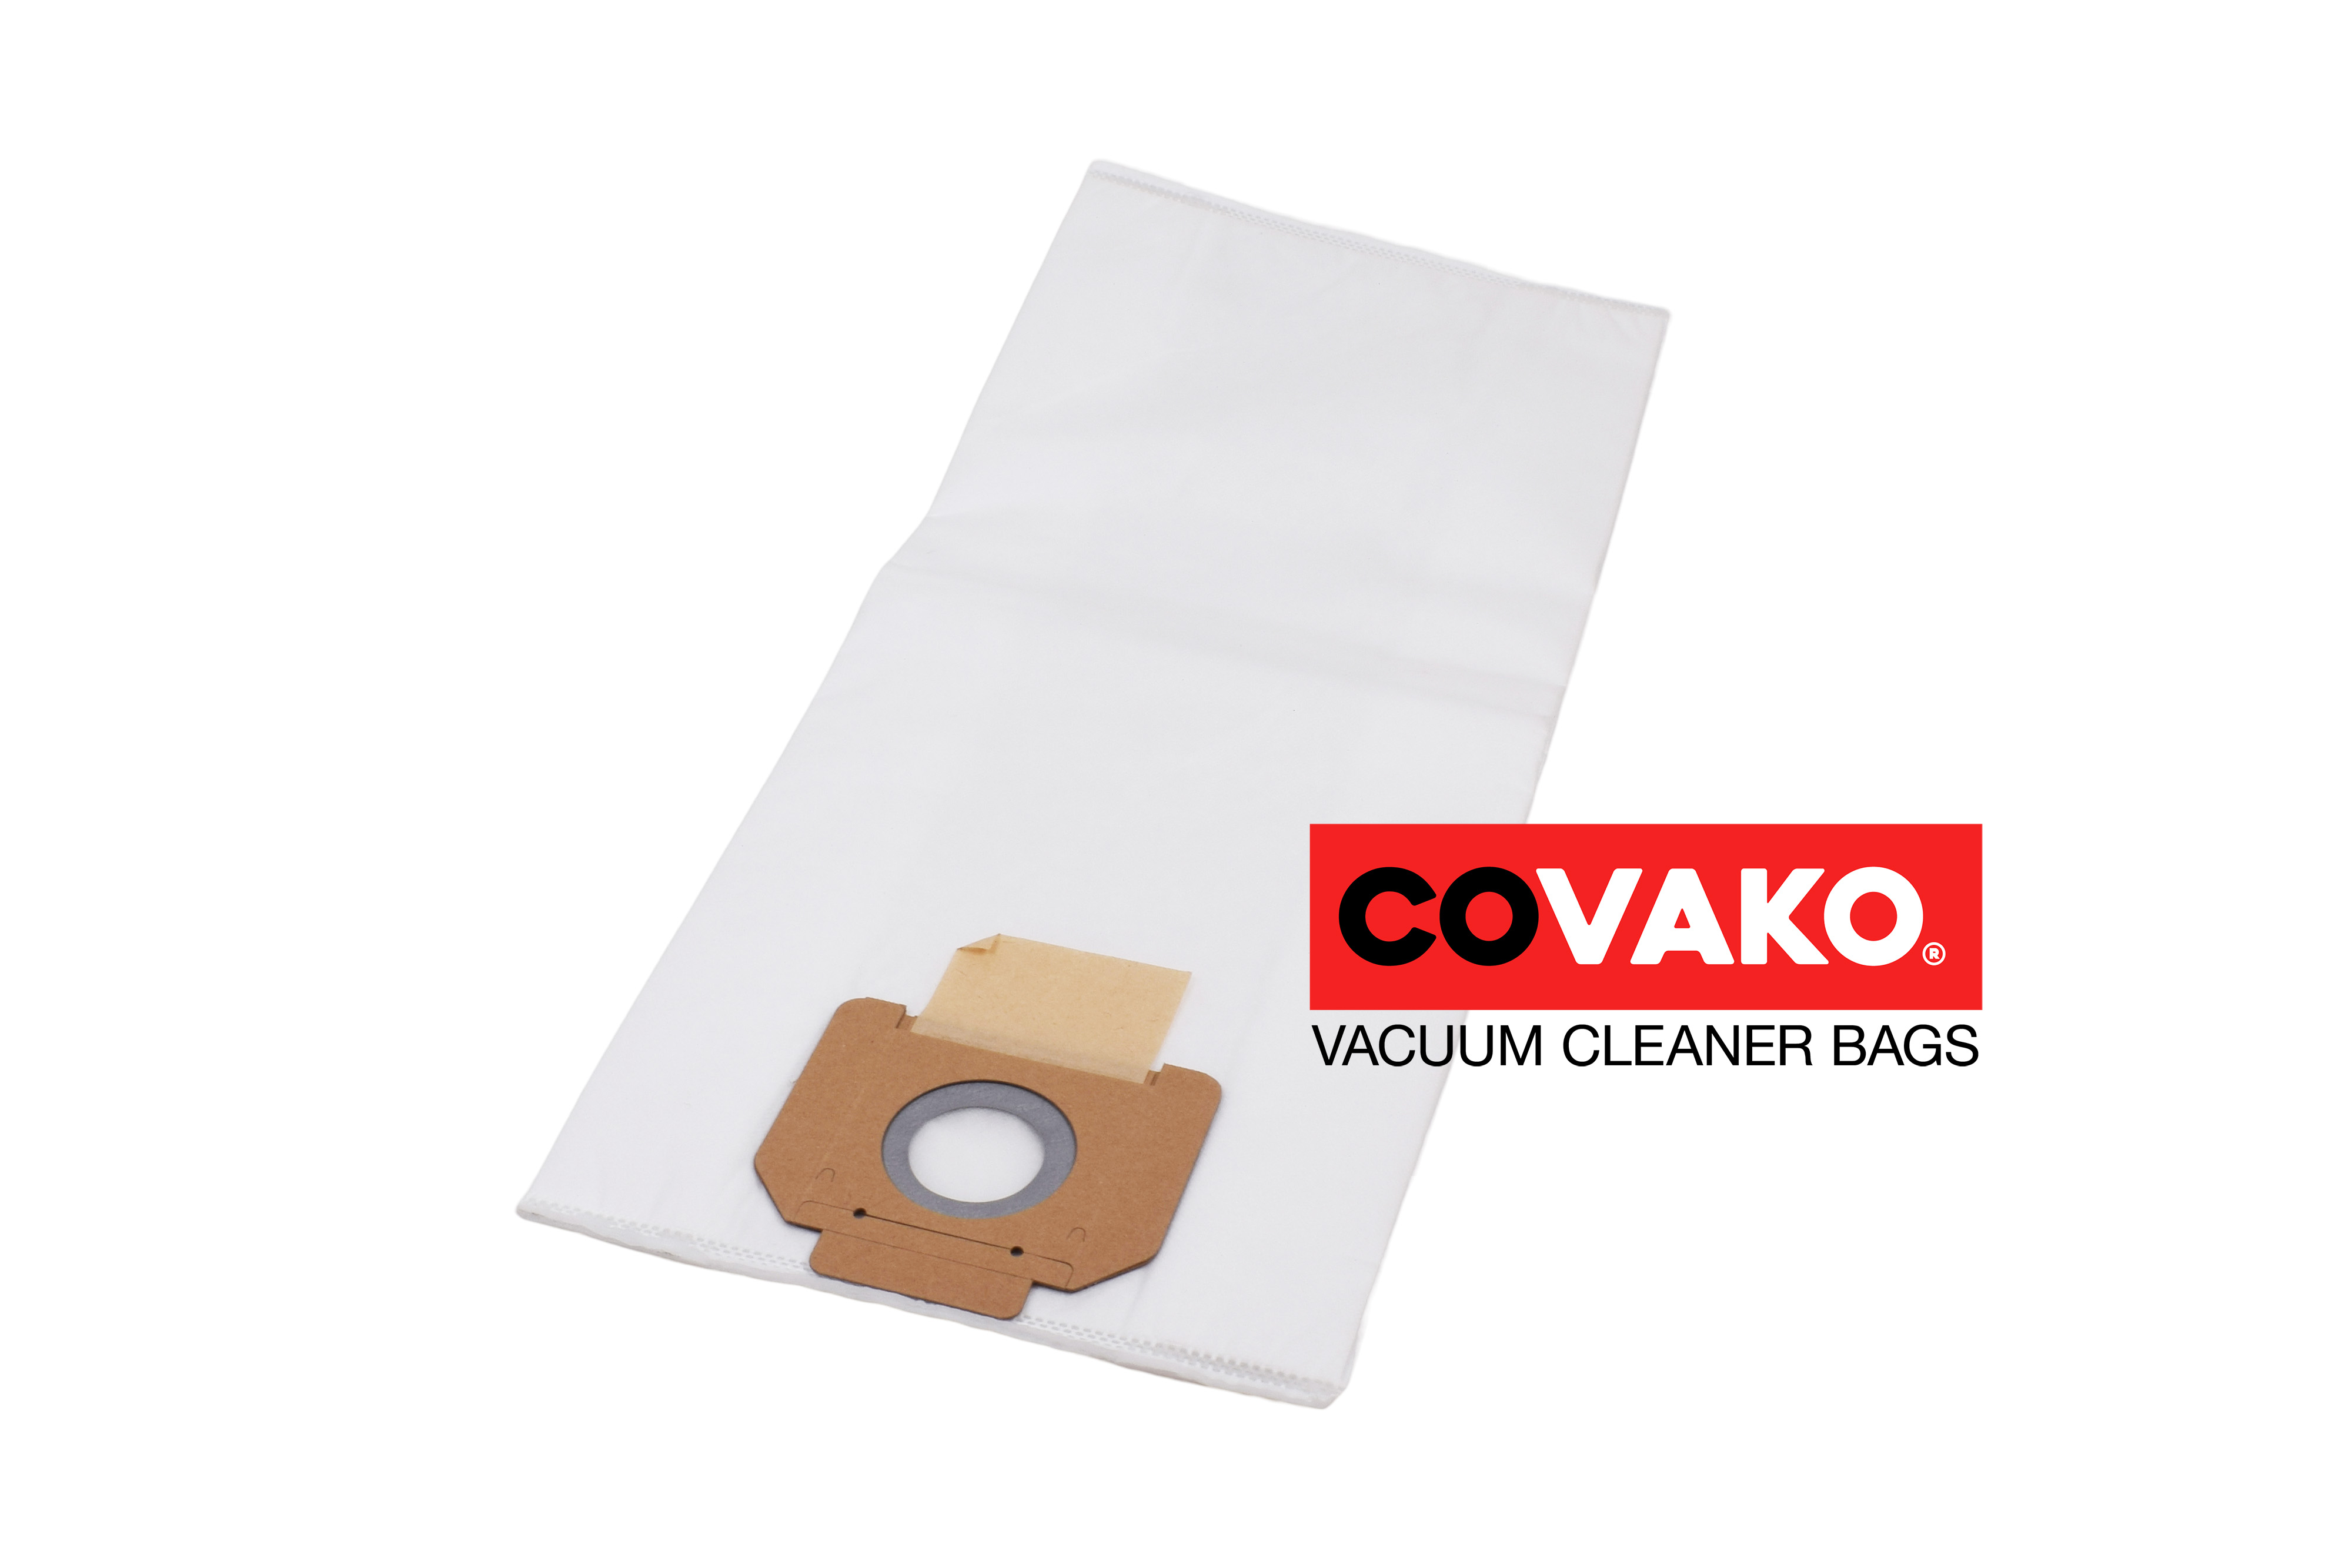 IPC YS 2400/45 / Synthesis - IPC vacuum cleaner bags